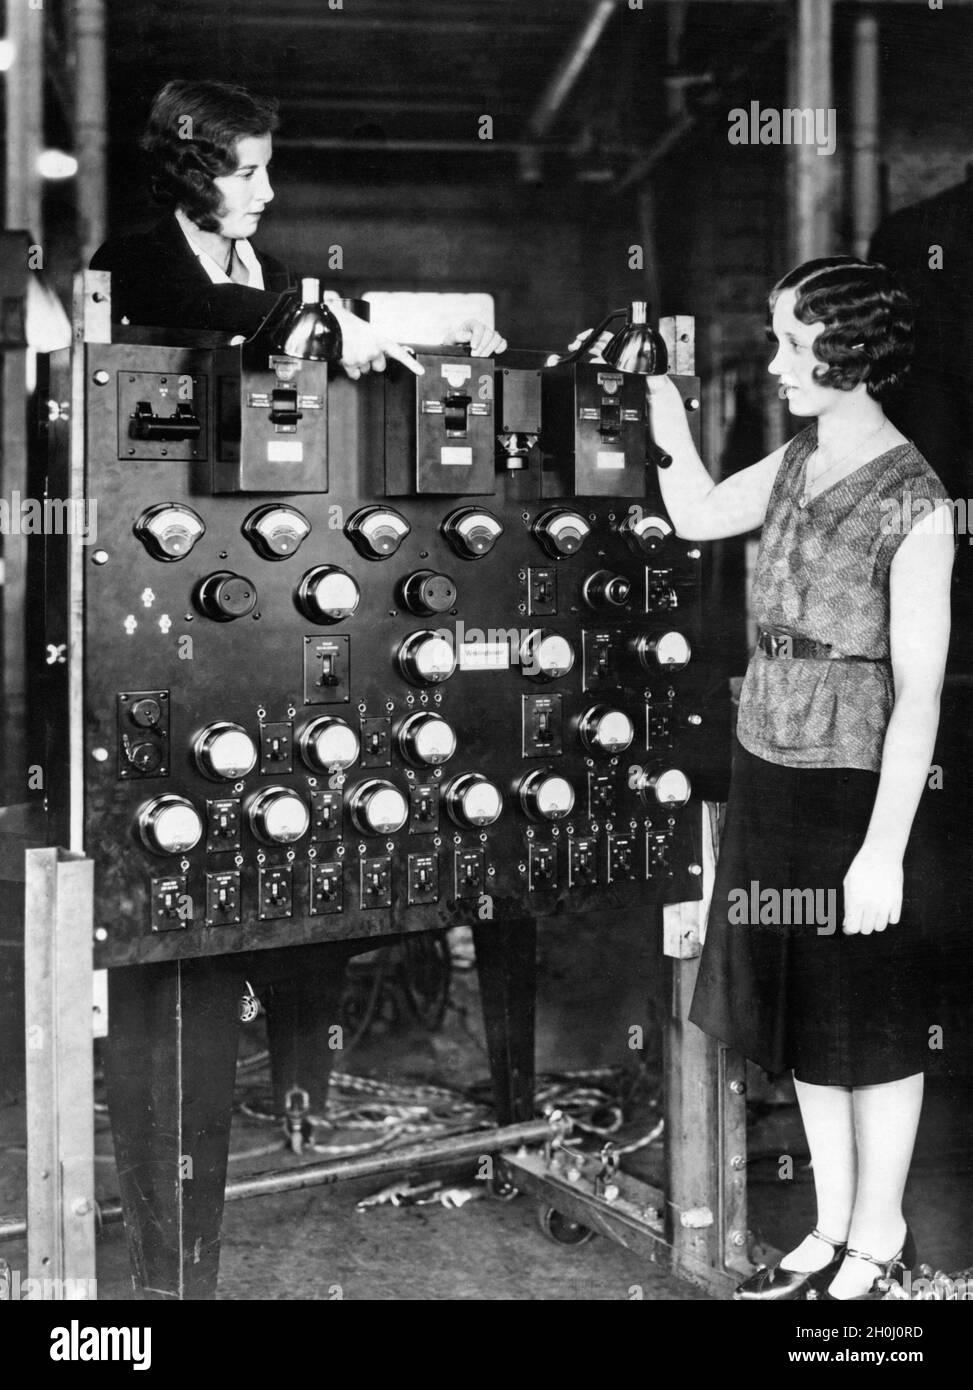 Two women look at the central control station of the Goodyear Airdock hangar in Akron, Ohio. The new control center controls all the technology in the plant. The two women stand for the press coverage Model. [automated translation] Stock Photo